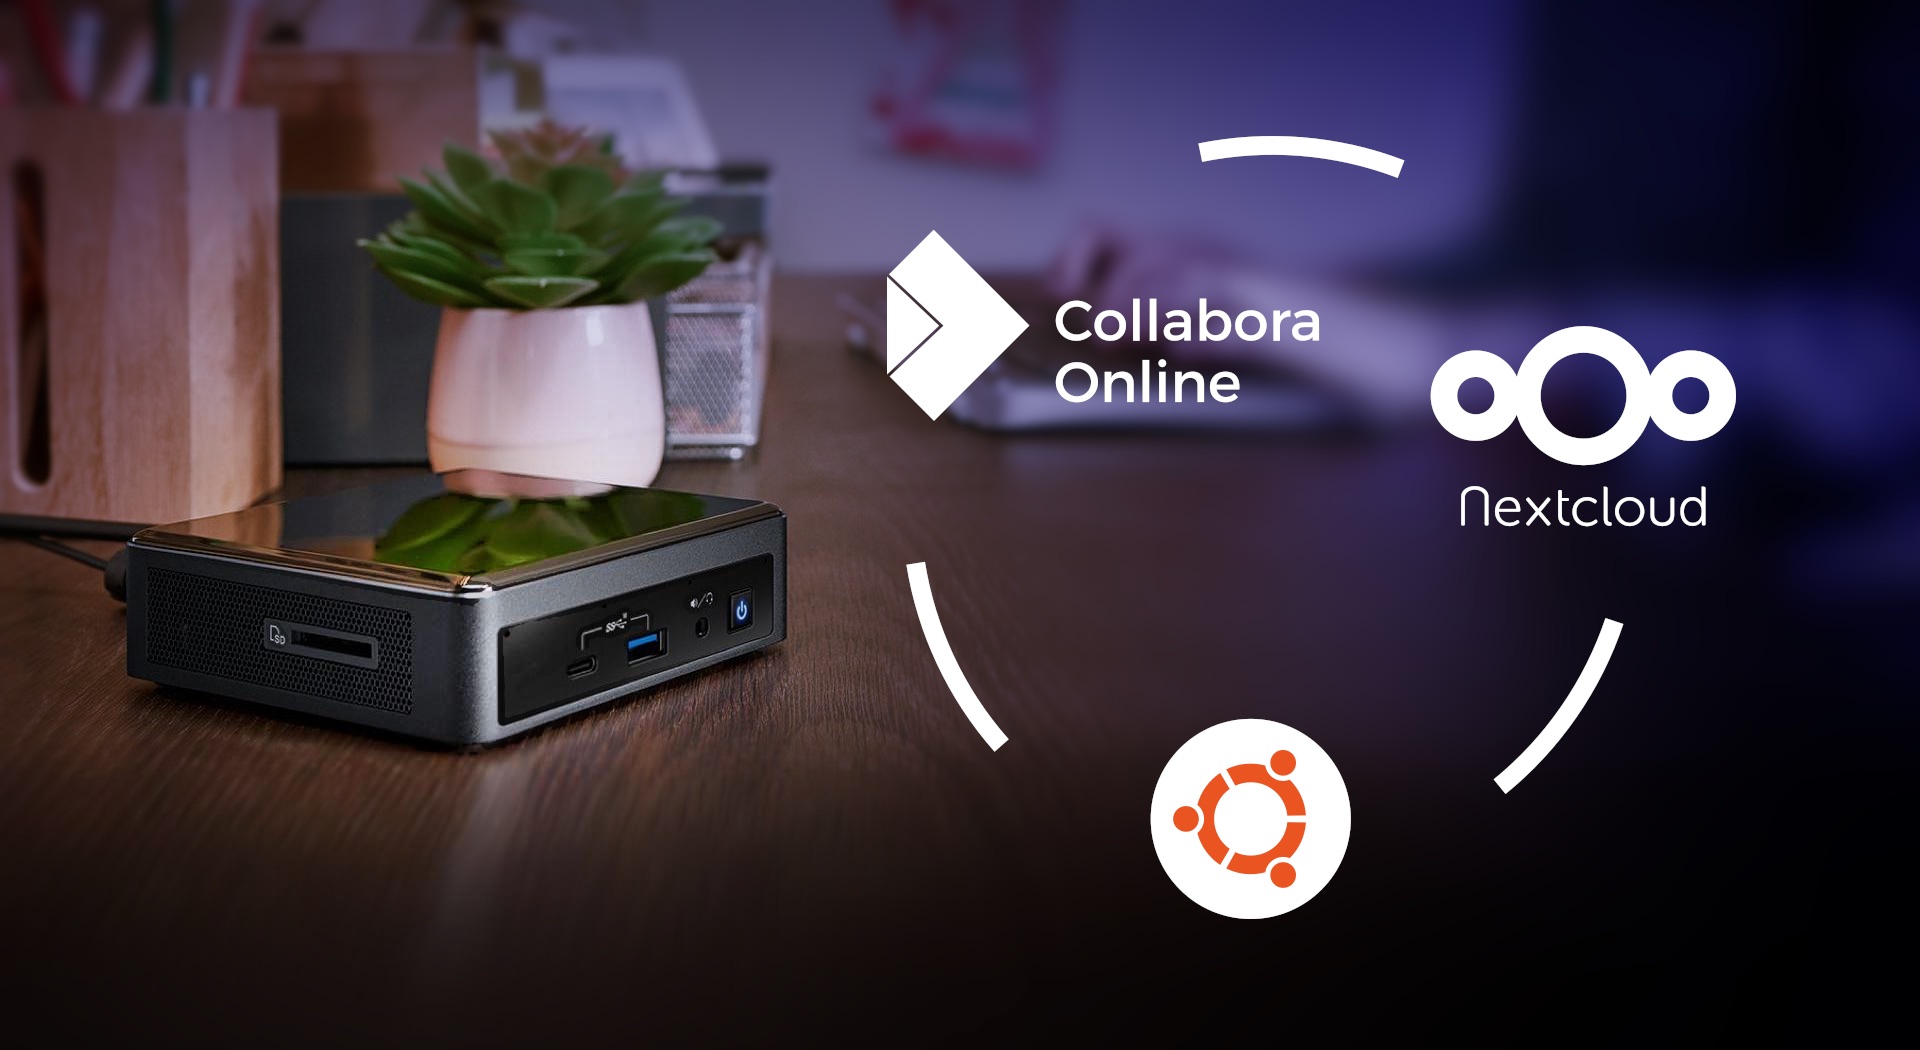 You Can Now Integrate Collabora Online into the Nextcloud Ubuntu Appliance